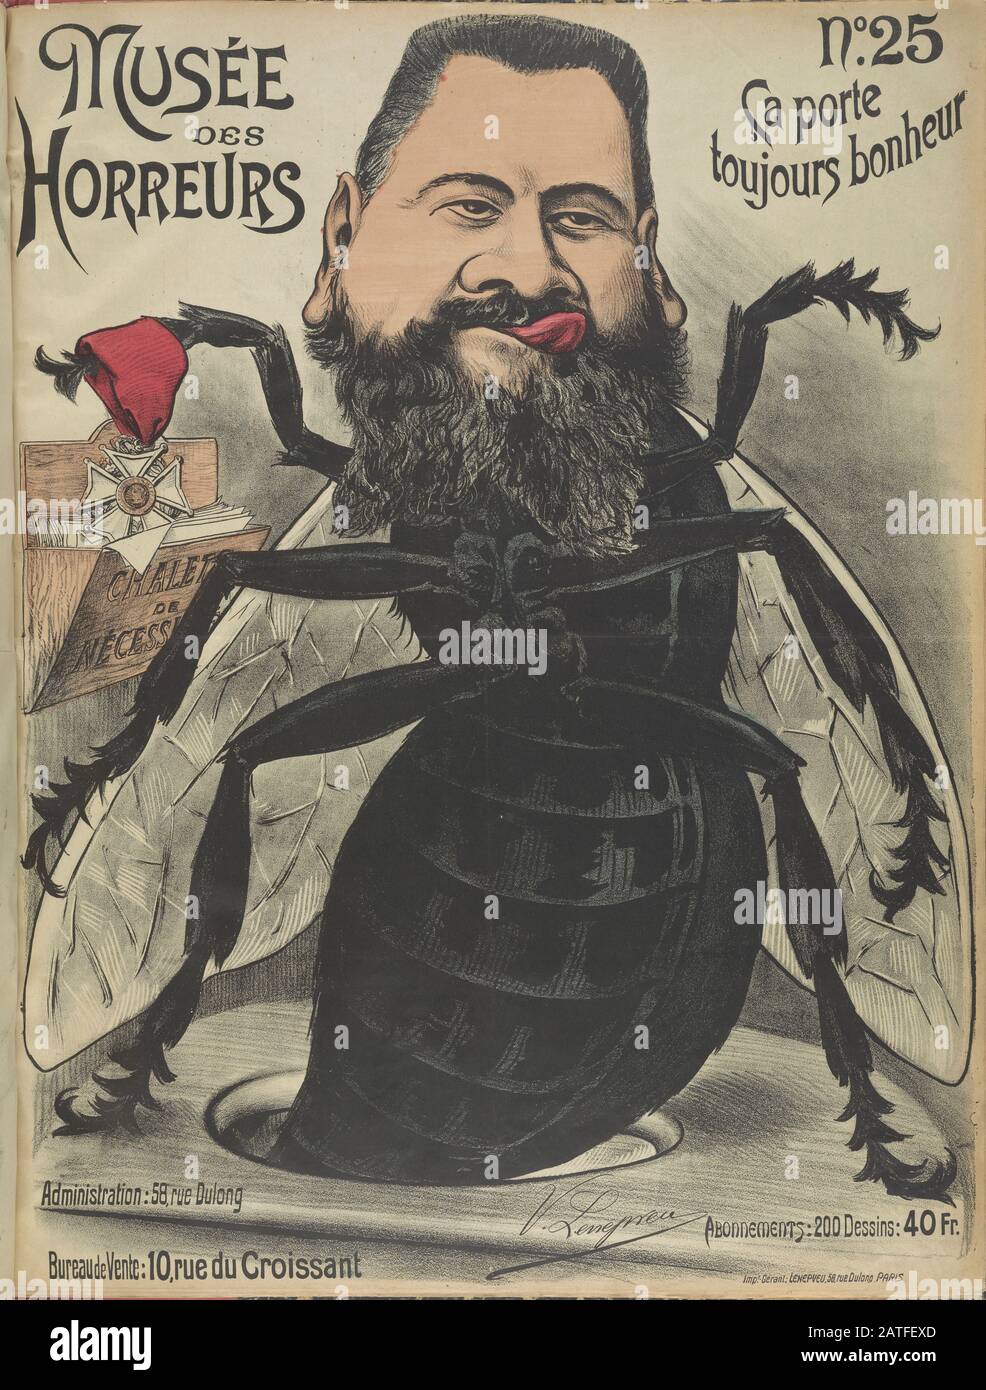 Musée des Horreurs -  No. 25 Ça porte toujours bonheur  -  1899  -  Lenepveu, V.  -  Caricature of Daniel Wilson (1840-1919) as a fly licking his lips and taking a medal from a box of papers. Wilson was the son-in-law of Jules Grévy, President of France (1879-1887). Prior to the Dreyfus Affair, Wilson was accused of using his position to traffick in the awards of the Legion of Honour, which prompted President Grévy's resignation in 1887. Hand colored. Stock Photo